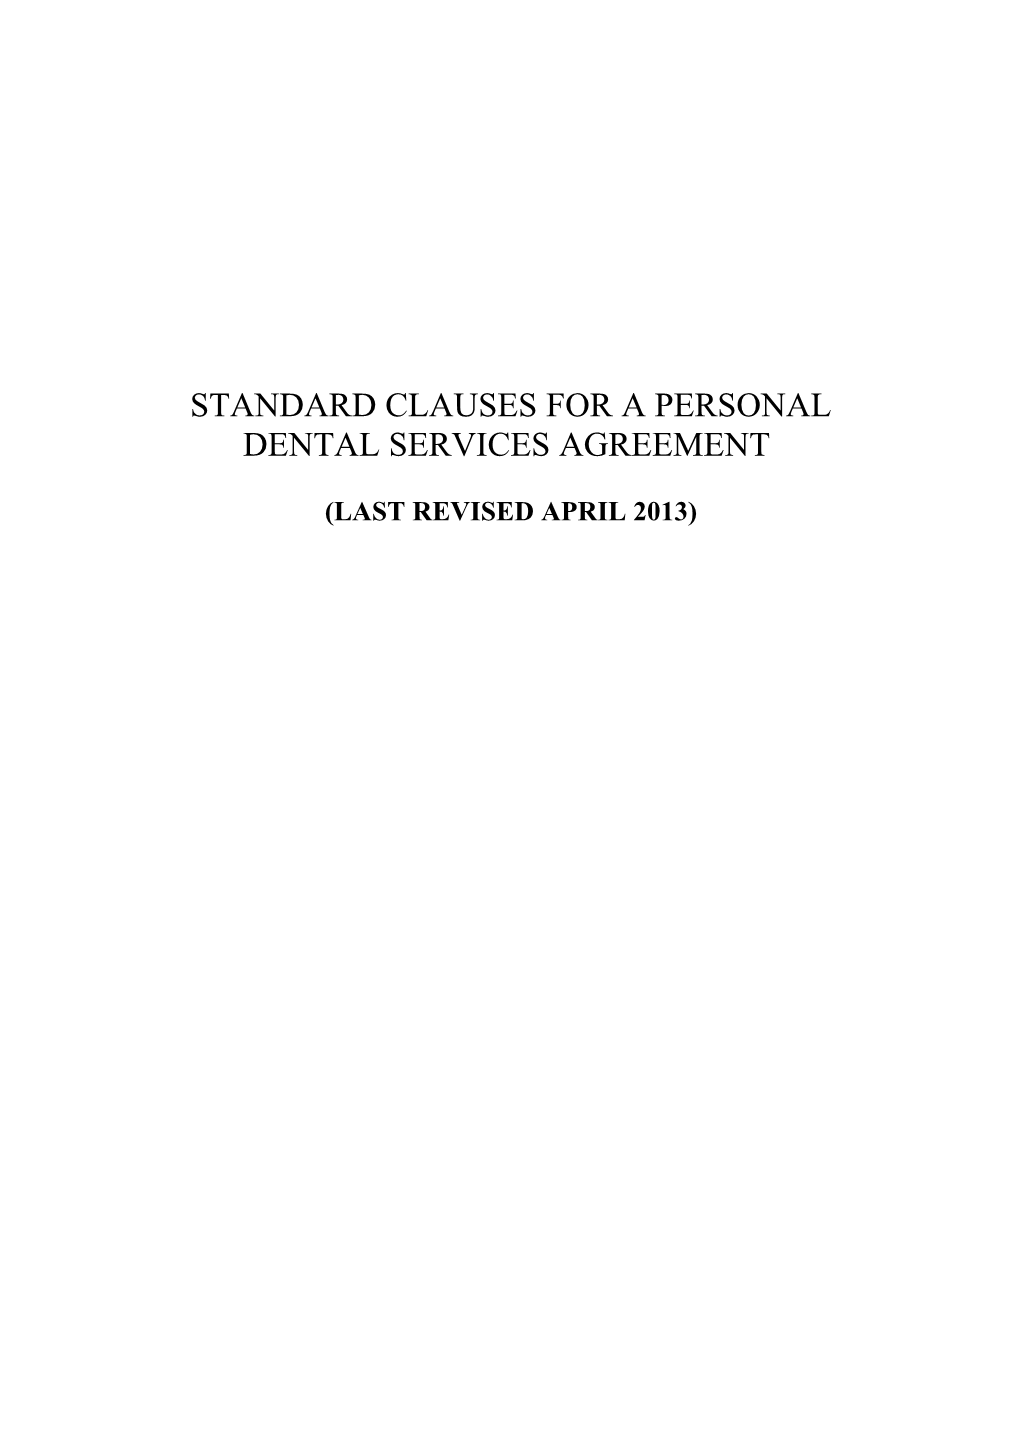 Standard Clauses for a Personal Dental Services Agreement Where the Primary Care Trust